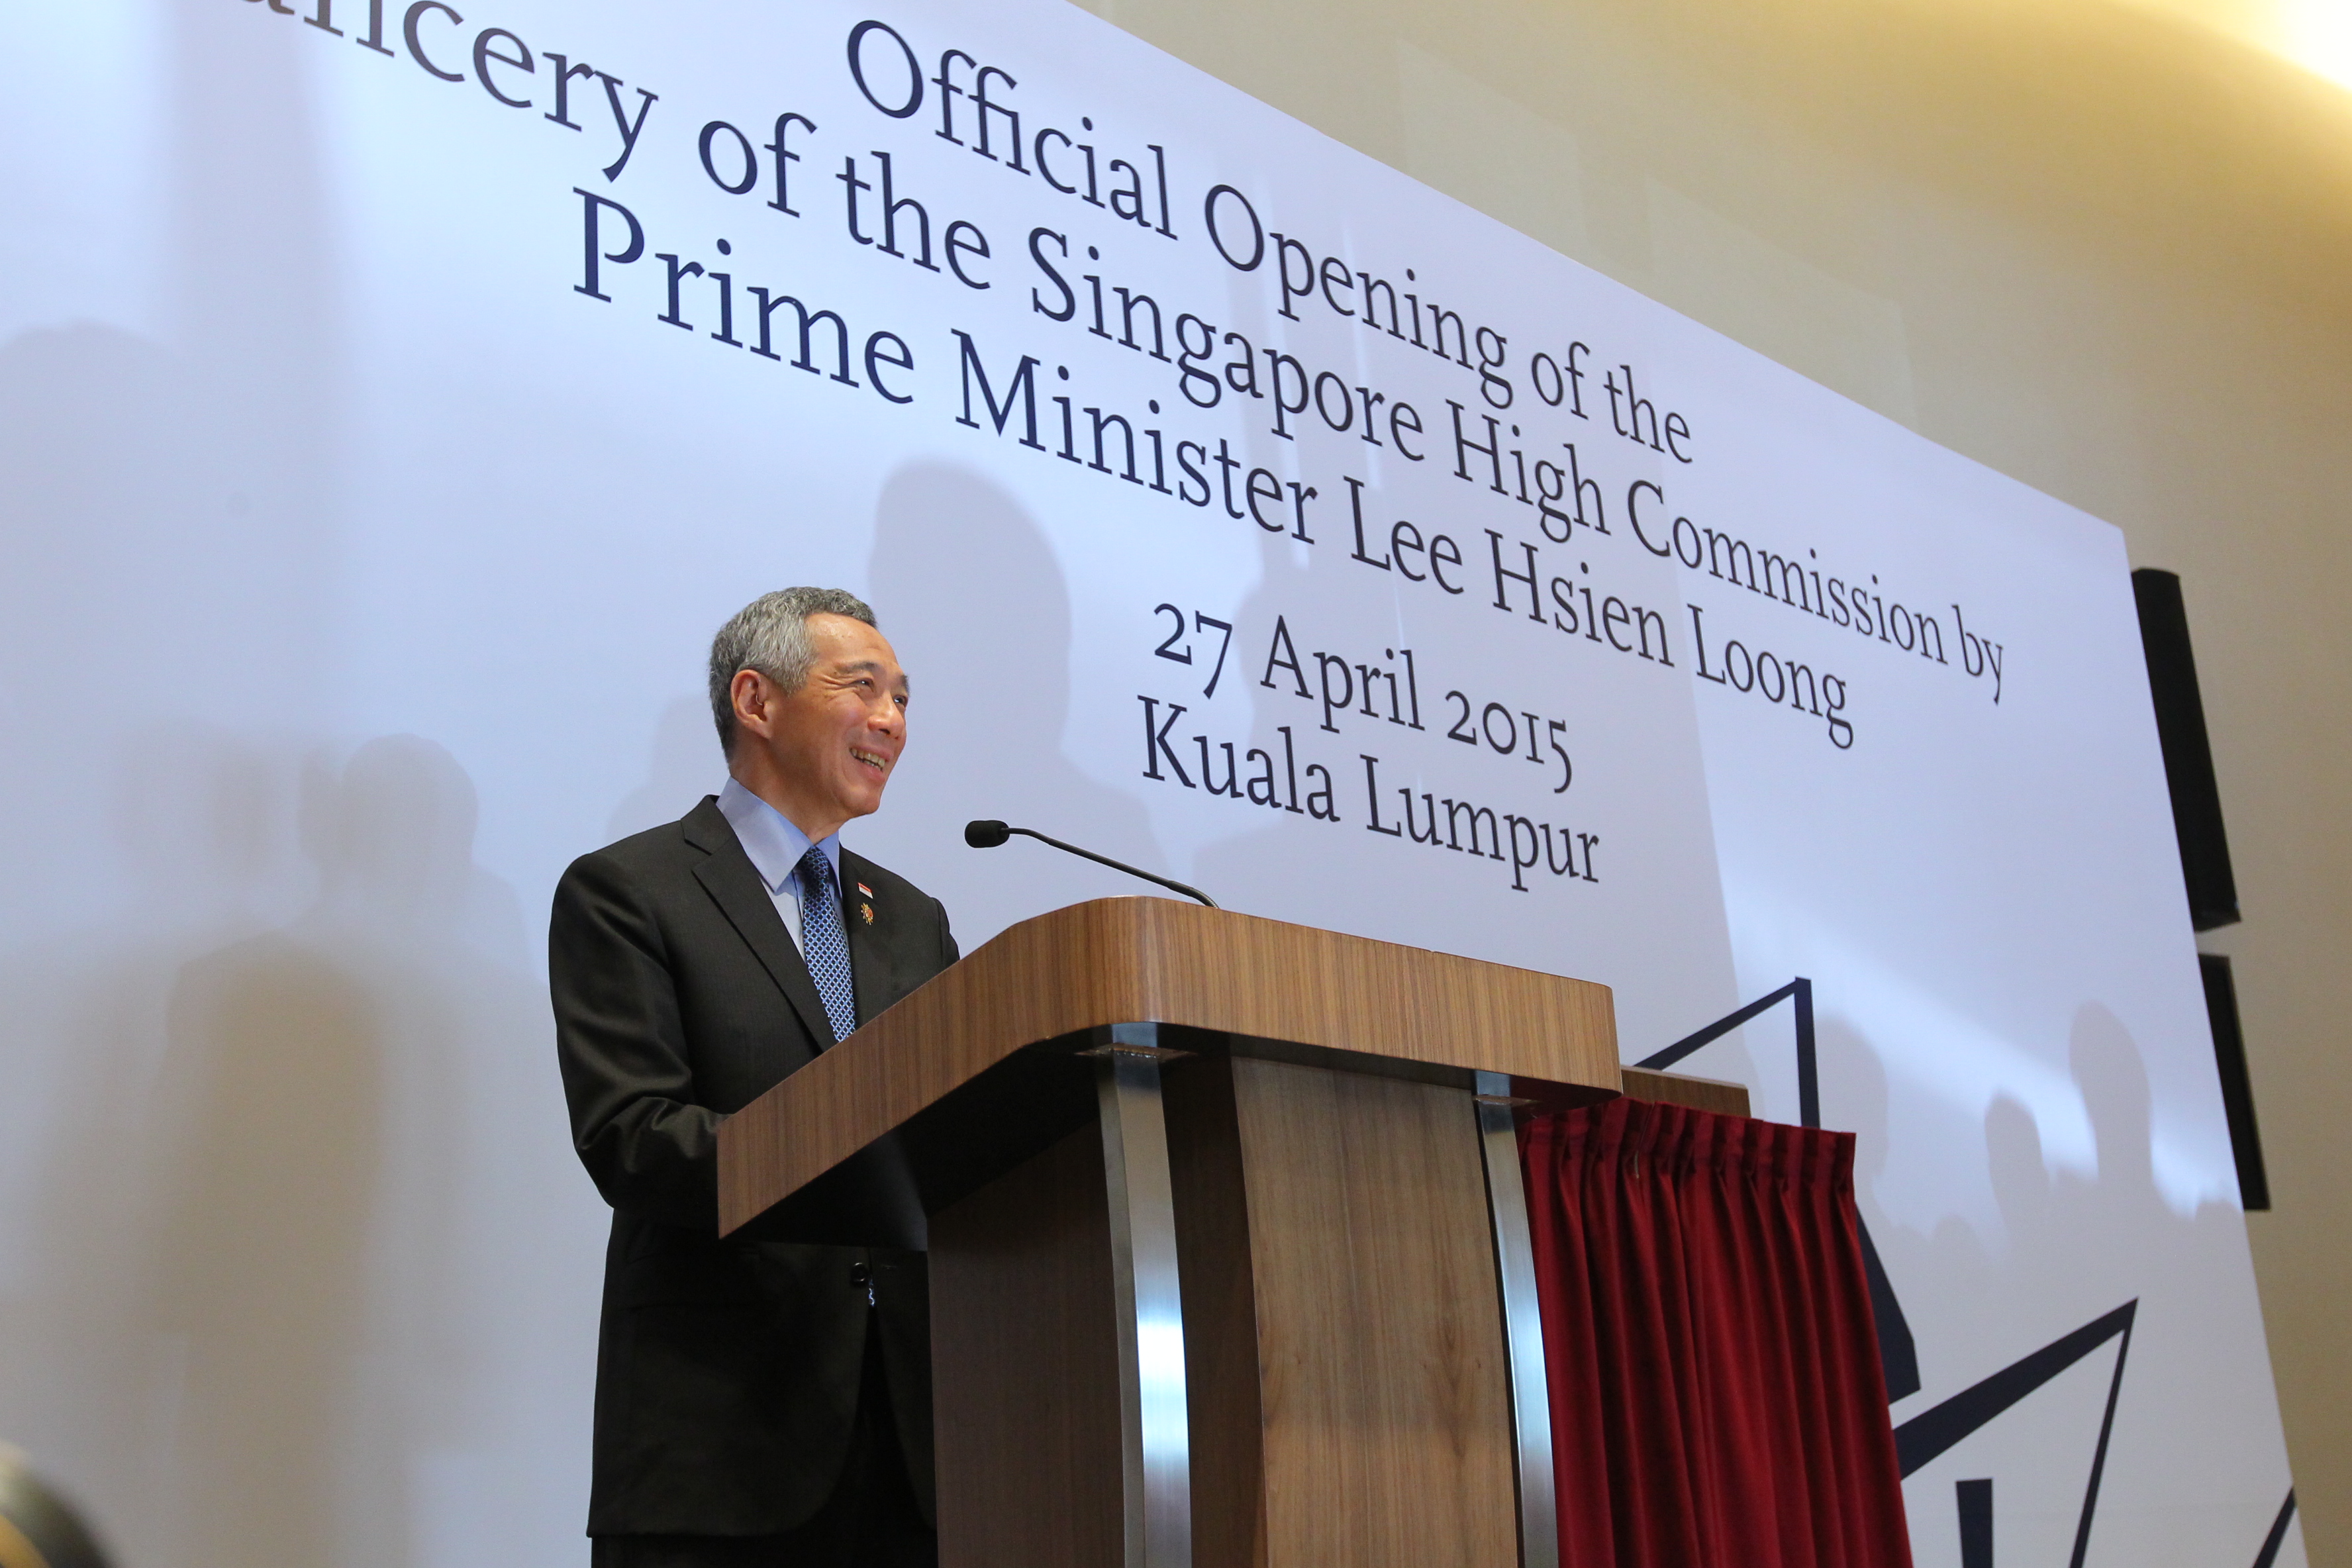 Opening of the Chancery of the Singapore High Commission in Kuala Lumpur on 27 Apr 2015 (MCI Photo by Kenji Soon)